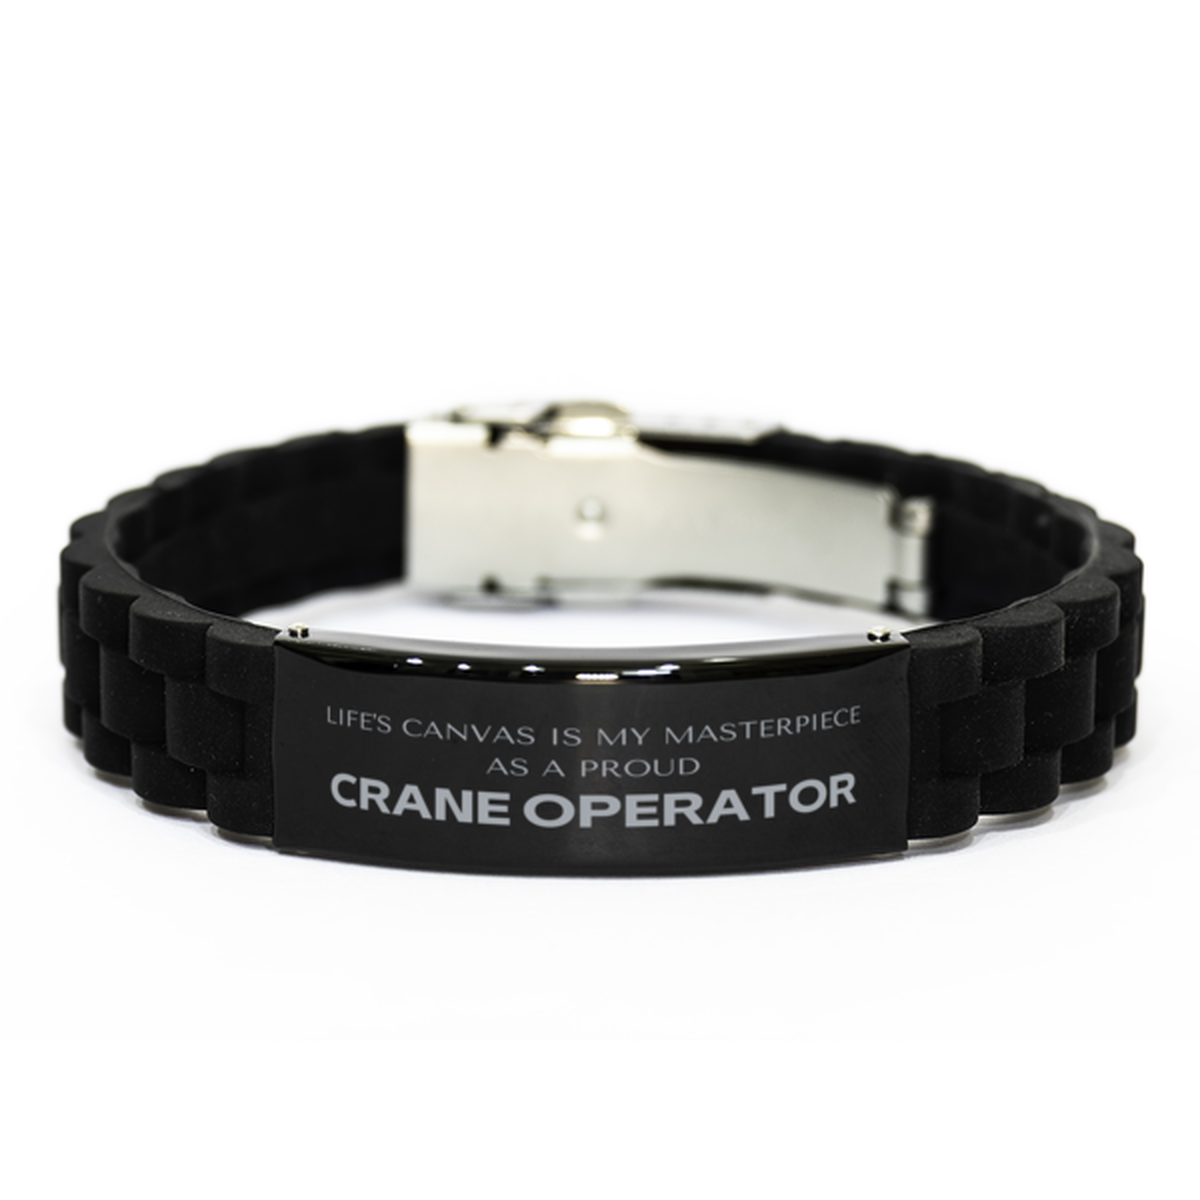 Proud Crane Operator Gifts, Life's canvas is my masterpiece, Epic Birthday Christmas Unique Black Glidelock Clasp Bracelet For Crane Operator, Coworkers, Men, Women, Friends